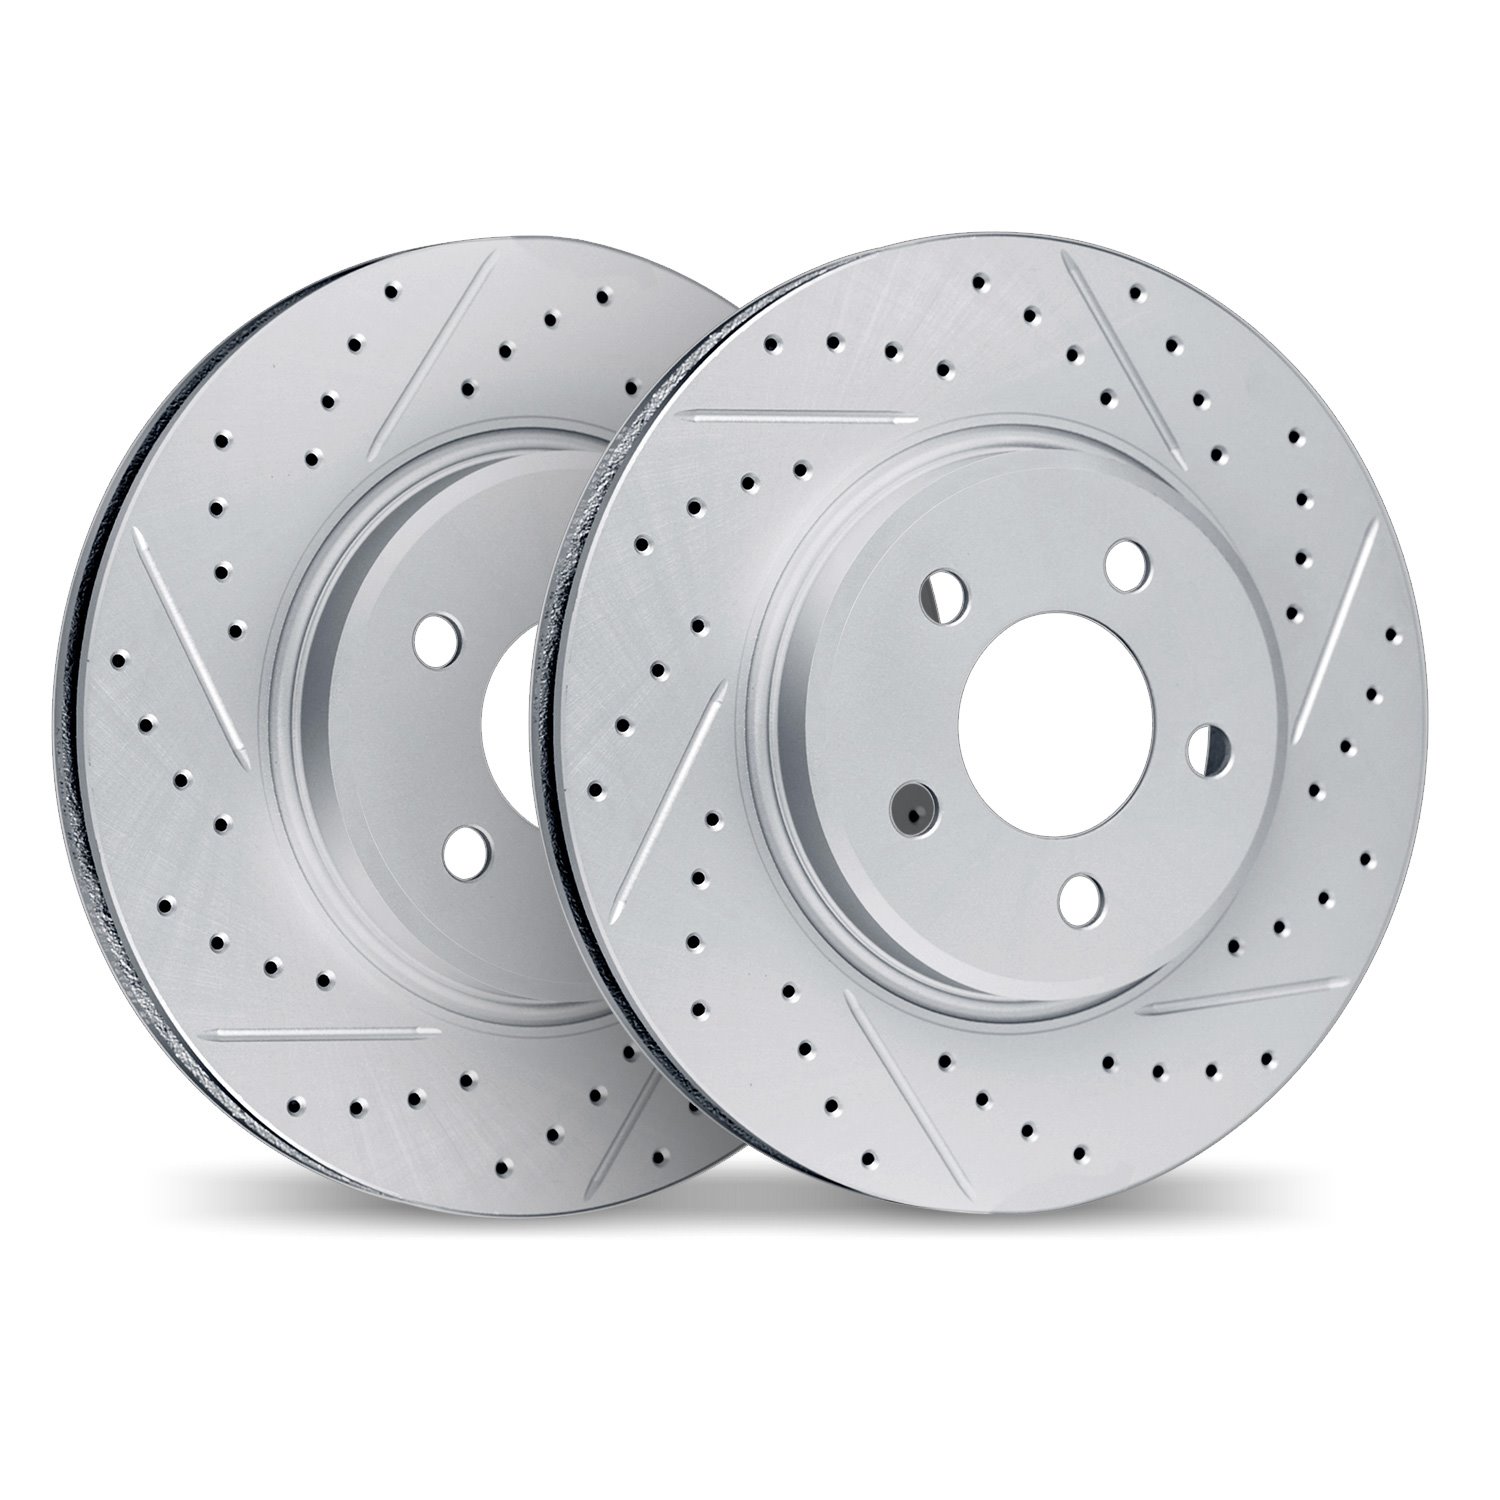 2002-11009 Geoperformance Drilled/Slotted Brake Rotors, 1994-2002 Land Rover, Position: Front